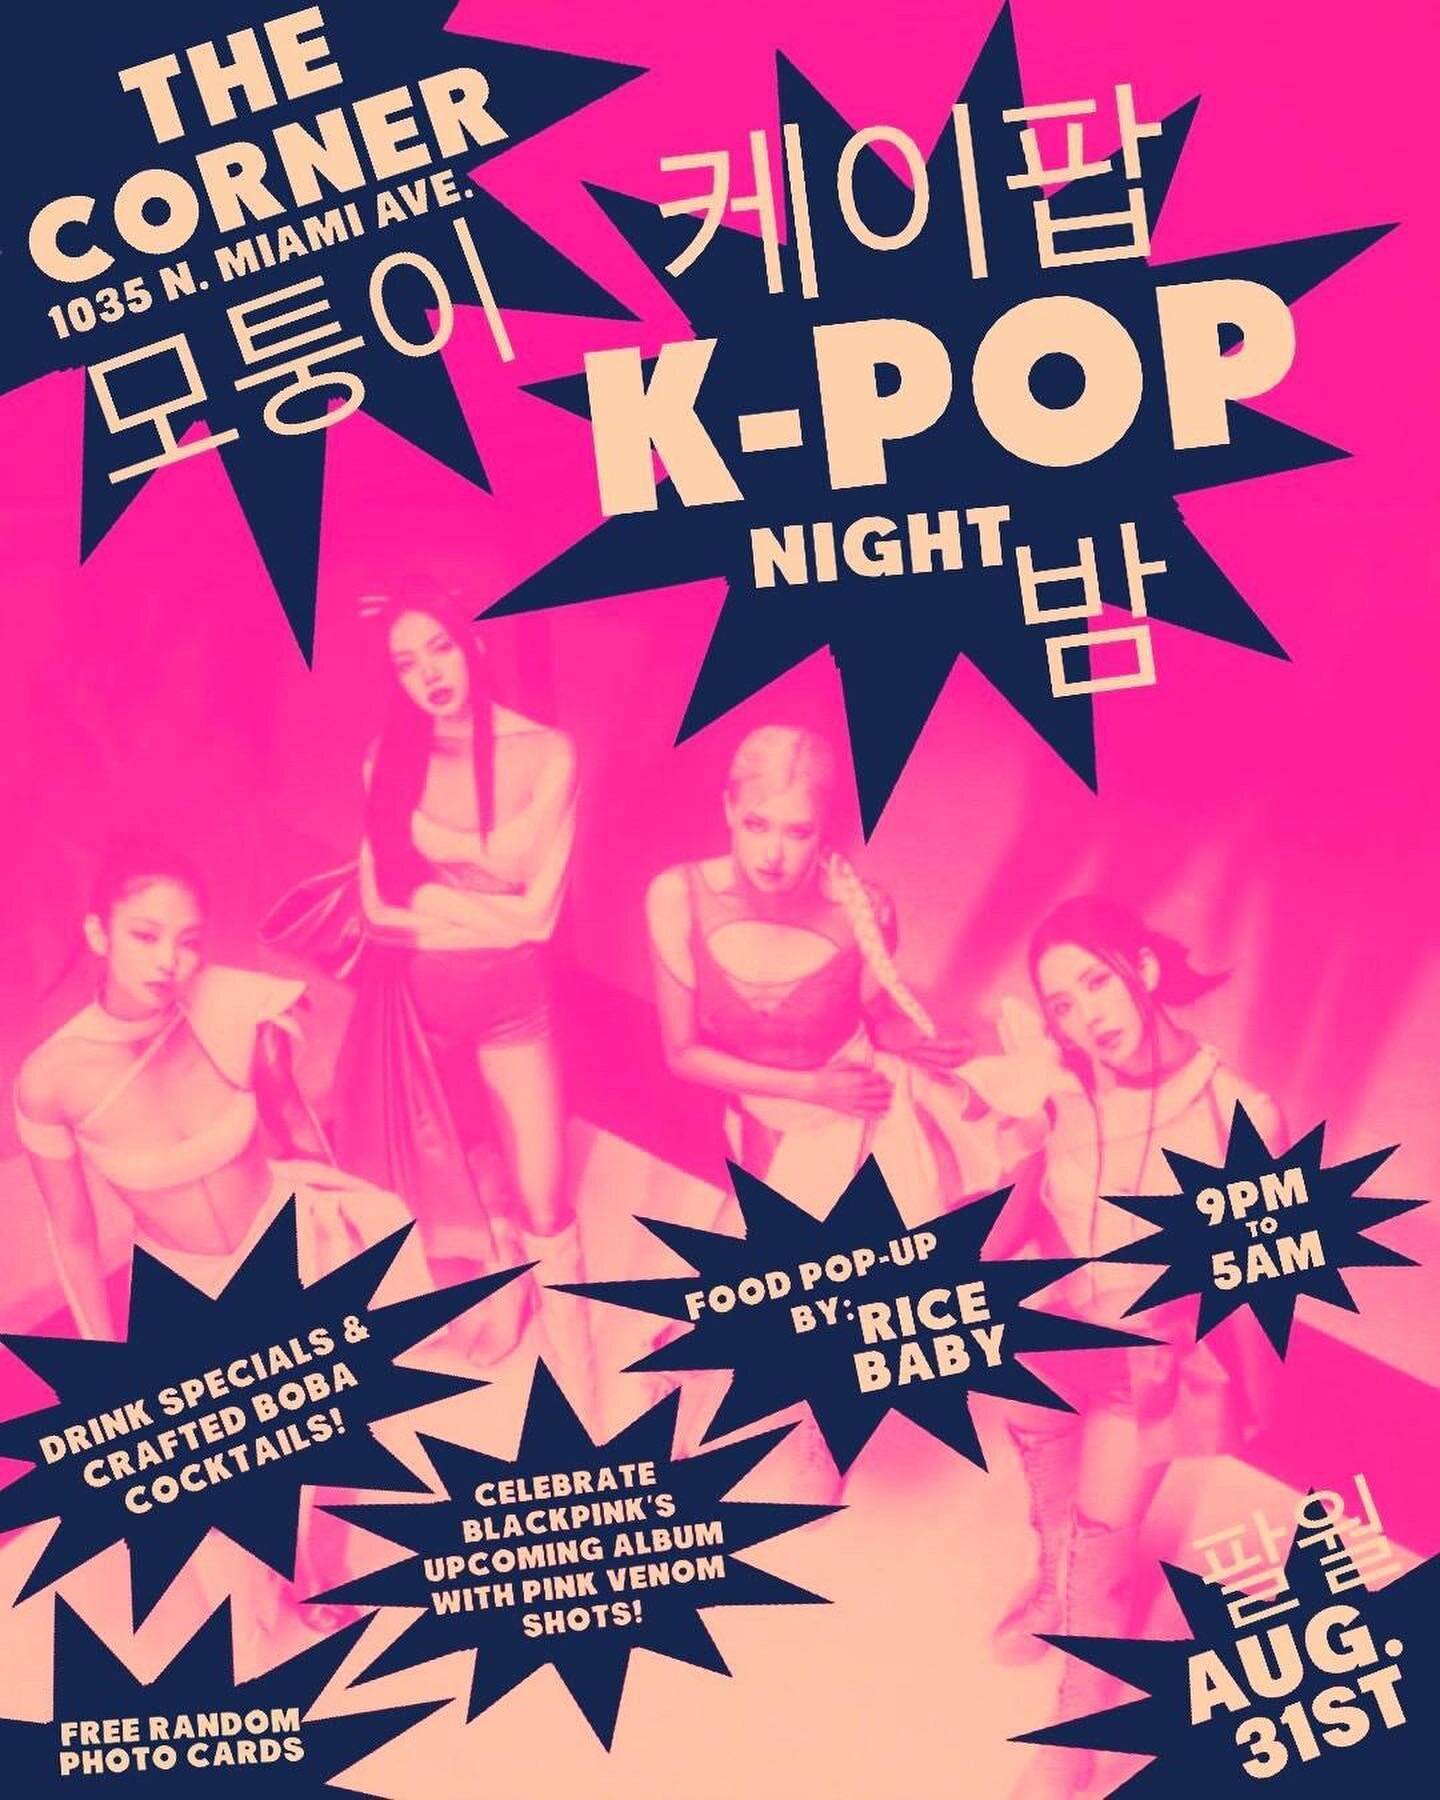 THIS Wednesday will be our first K-Pop night! Come by for delicious cocktails, food by @thericebaby_ , and to wish our very own @kiefnik a happy birthday at midnight! :) see you there